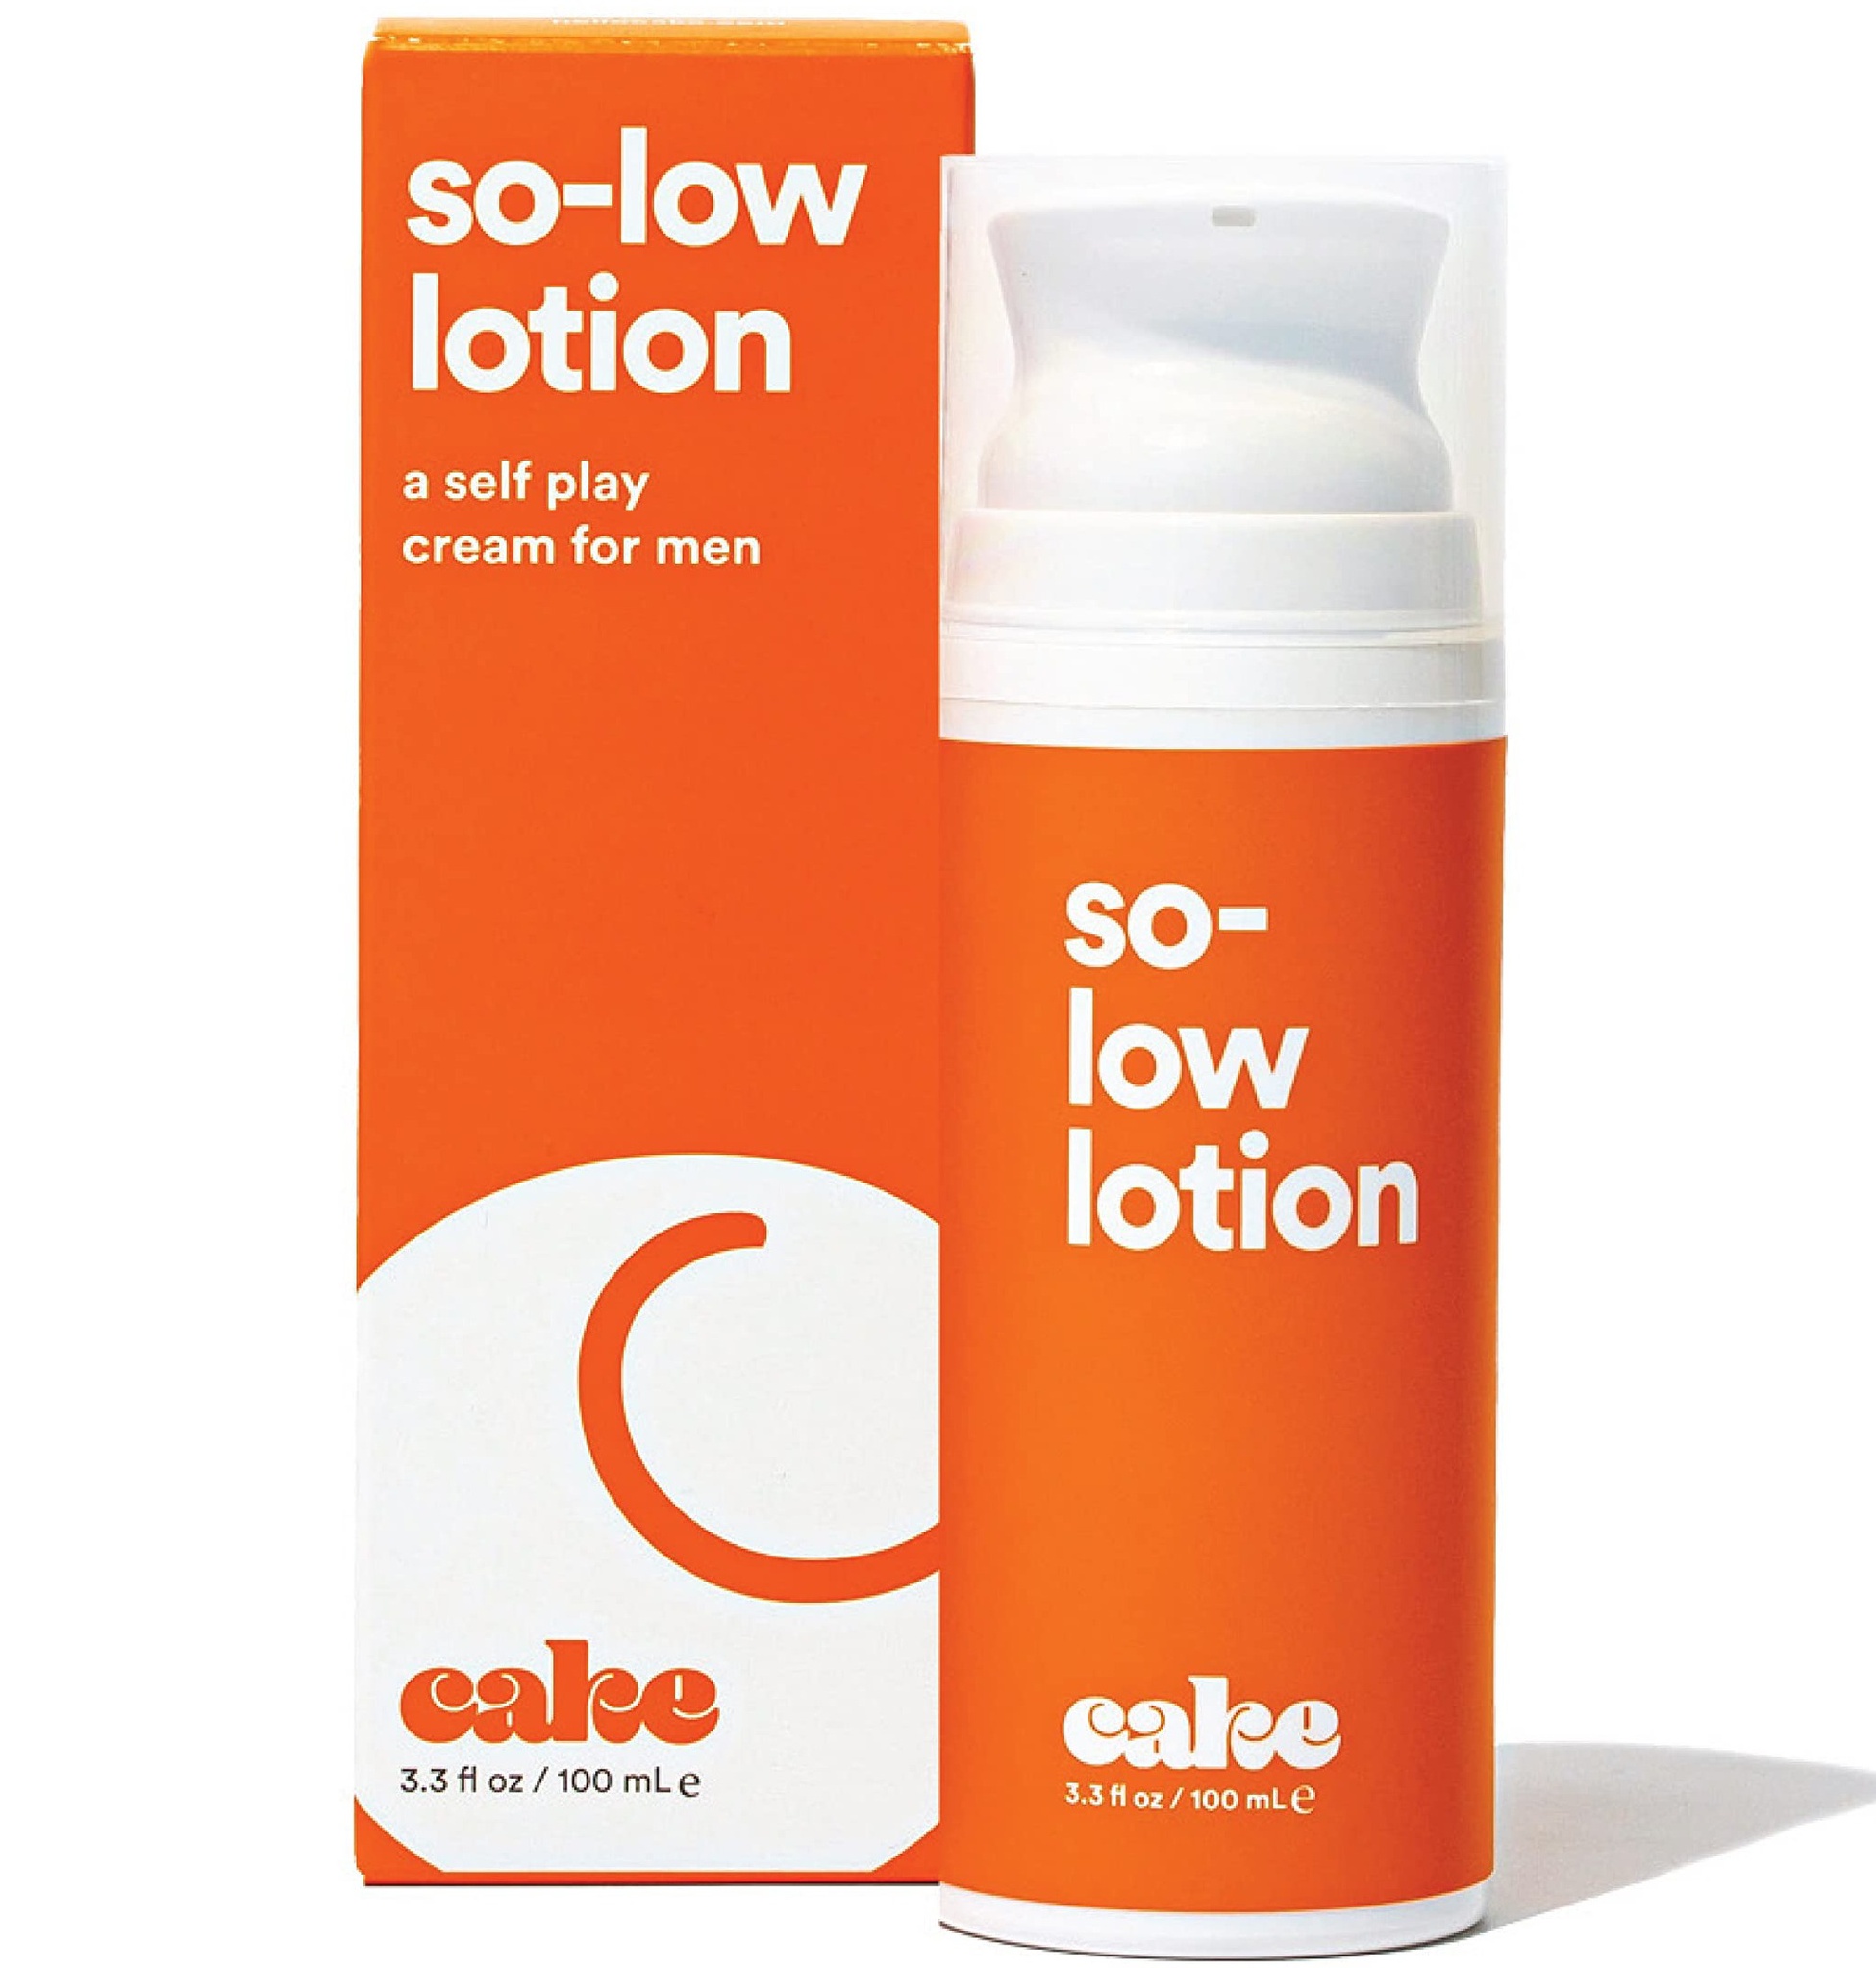 Cake So-low Lotion